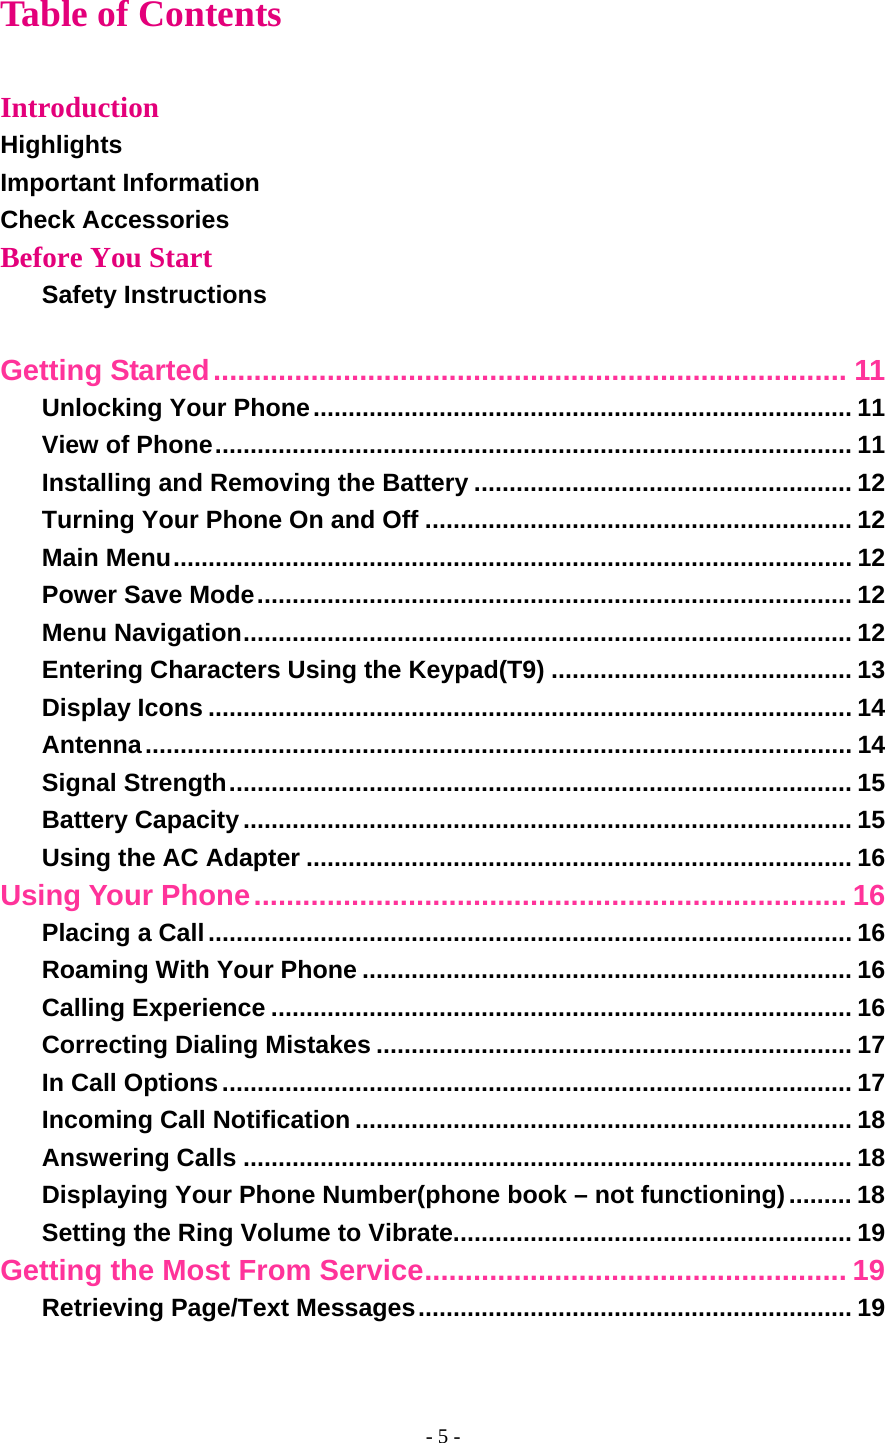 Table of Contents  Introduction Highlights Important Information Check Accessories Before You Start Safety Instructions  Getting Started.............................................................................. 11 Unlocking Your Phone............................................................................. 11 View of Phone........................................................................................... 11 Installing and Removing the Battery ...................................................... 12 Turning Your Phone On and Off ............................................................. 12 Main Menu................................................................................................. 12 Power Save Mode..................................................................................... 12 Menu Navigation....................................................................................... 12 Entering Characters Using the Keypad(T9) ........................................... 13 Display Icons ............................................................................................ 14 Antenna..................................................................................................... 14 Signal Strength......................................................................................... 15 Battery Capacity....................................................................................... 15 Using the AC Adapter .............................................................................. 16 Using Your Phone......................................................................... 16 Placing a Call............................................................................................ 16 Roaming With Your Phone ...................................................................... 16 Calling Experience ................................................................................... 16 Correcting Dialing Mistakes .................................................................... 17 In Call Options.......................................................................................... 17 Incoming Call Notification ....................................................................... 18 Answering Calls ....................................................................................... 18 Displaying Your Phone Number(phone book – not functioning)......... 18 Setting the Ring Volume to Vibrate......................................................... 19 Getting the Most From Service.................................................... 19 Retrieving Page/Text Messages.............................................................. 19 - 5 - 